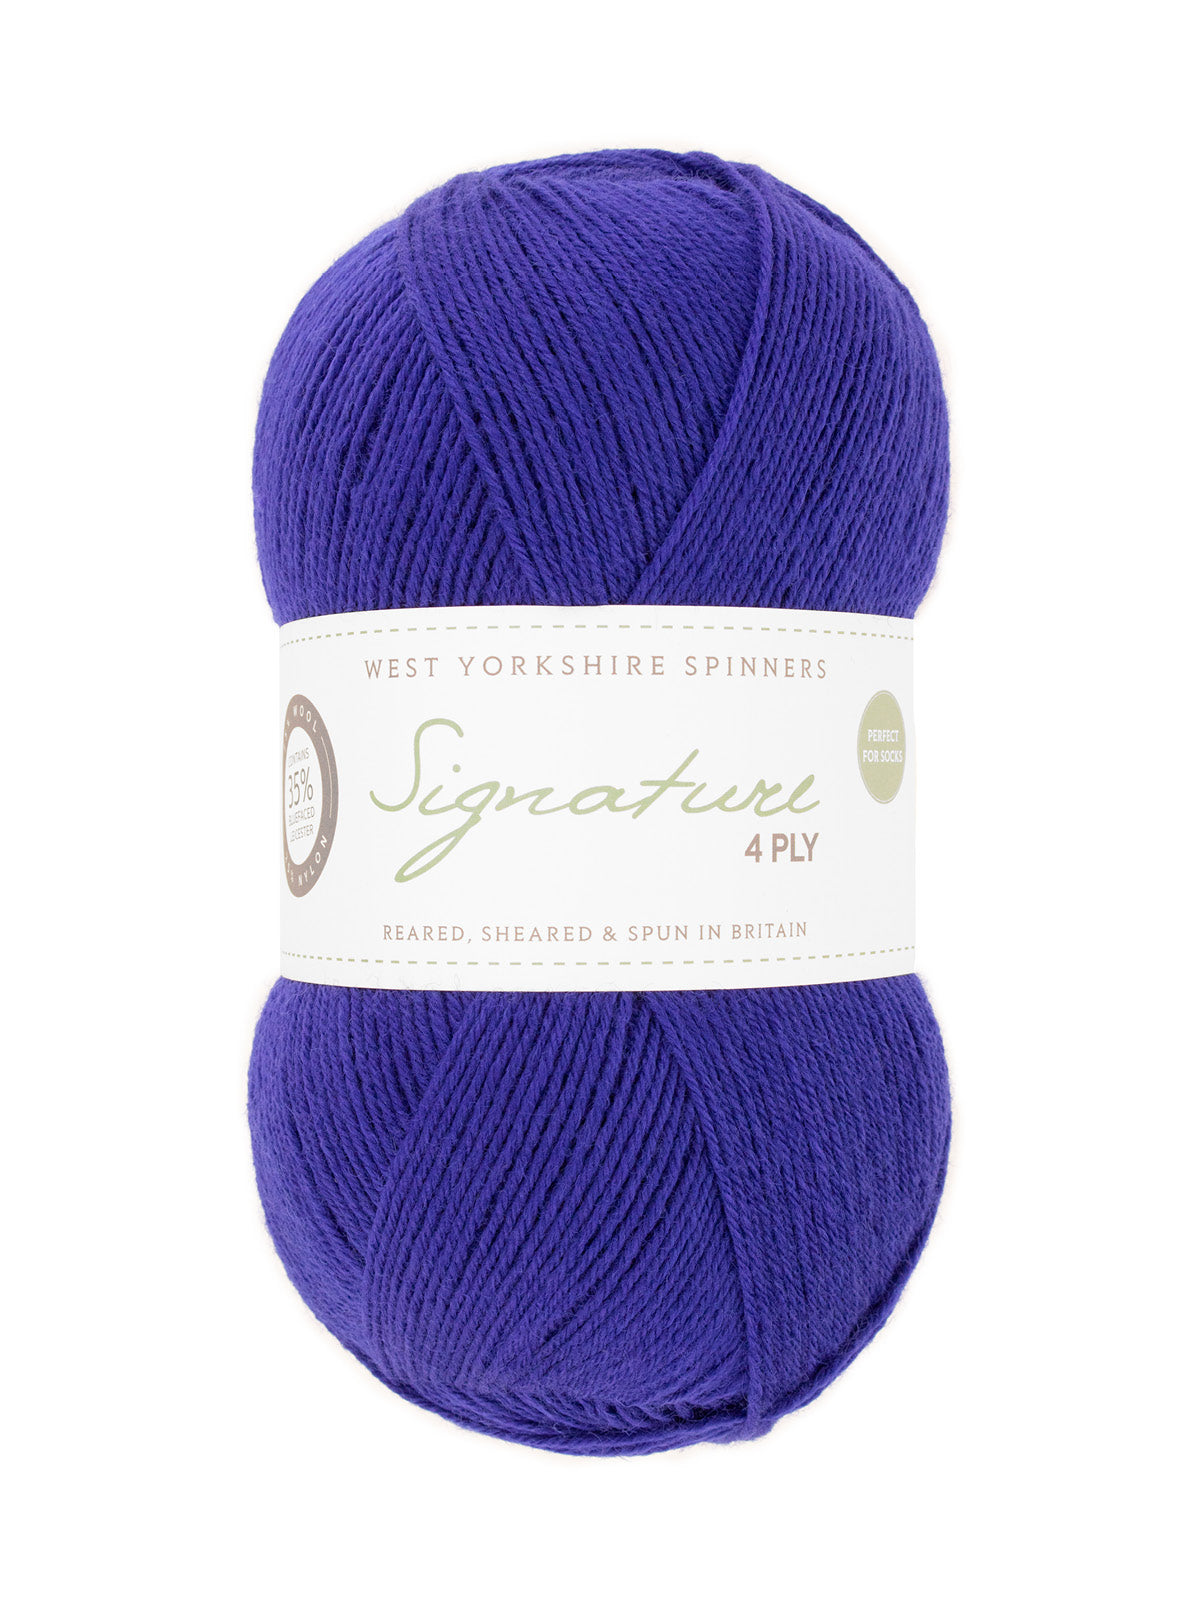 WYS Signature Solid 4ply